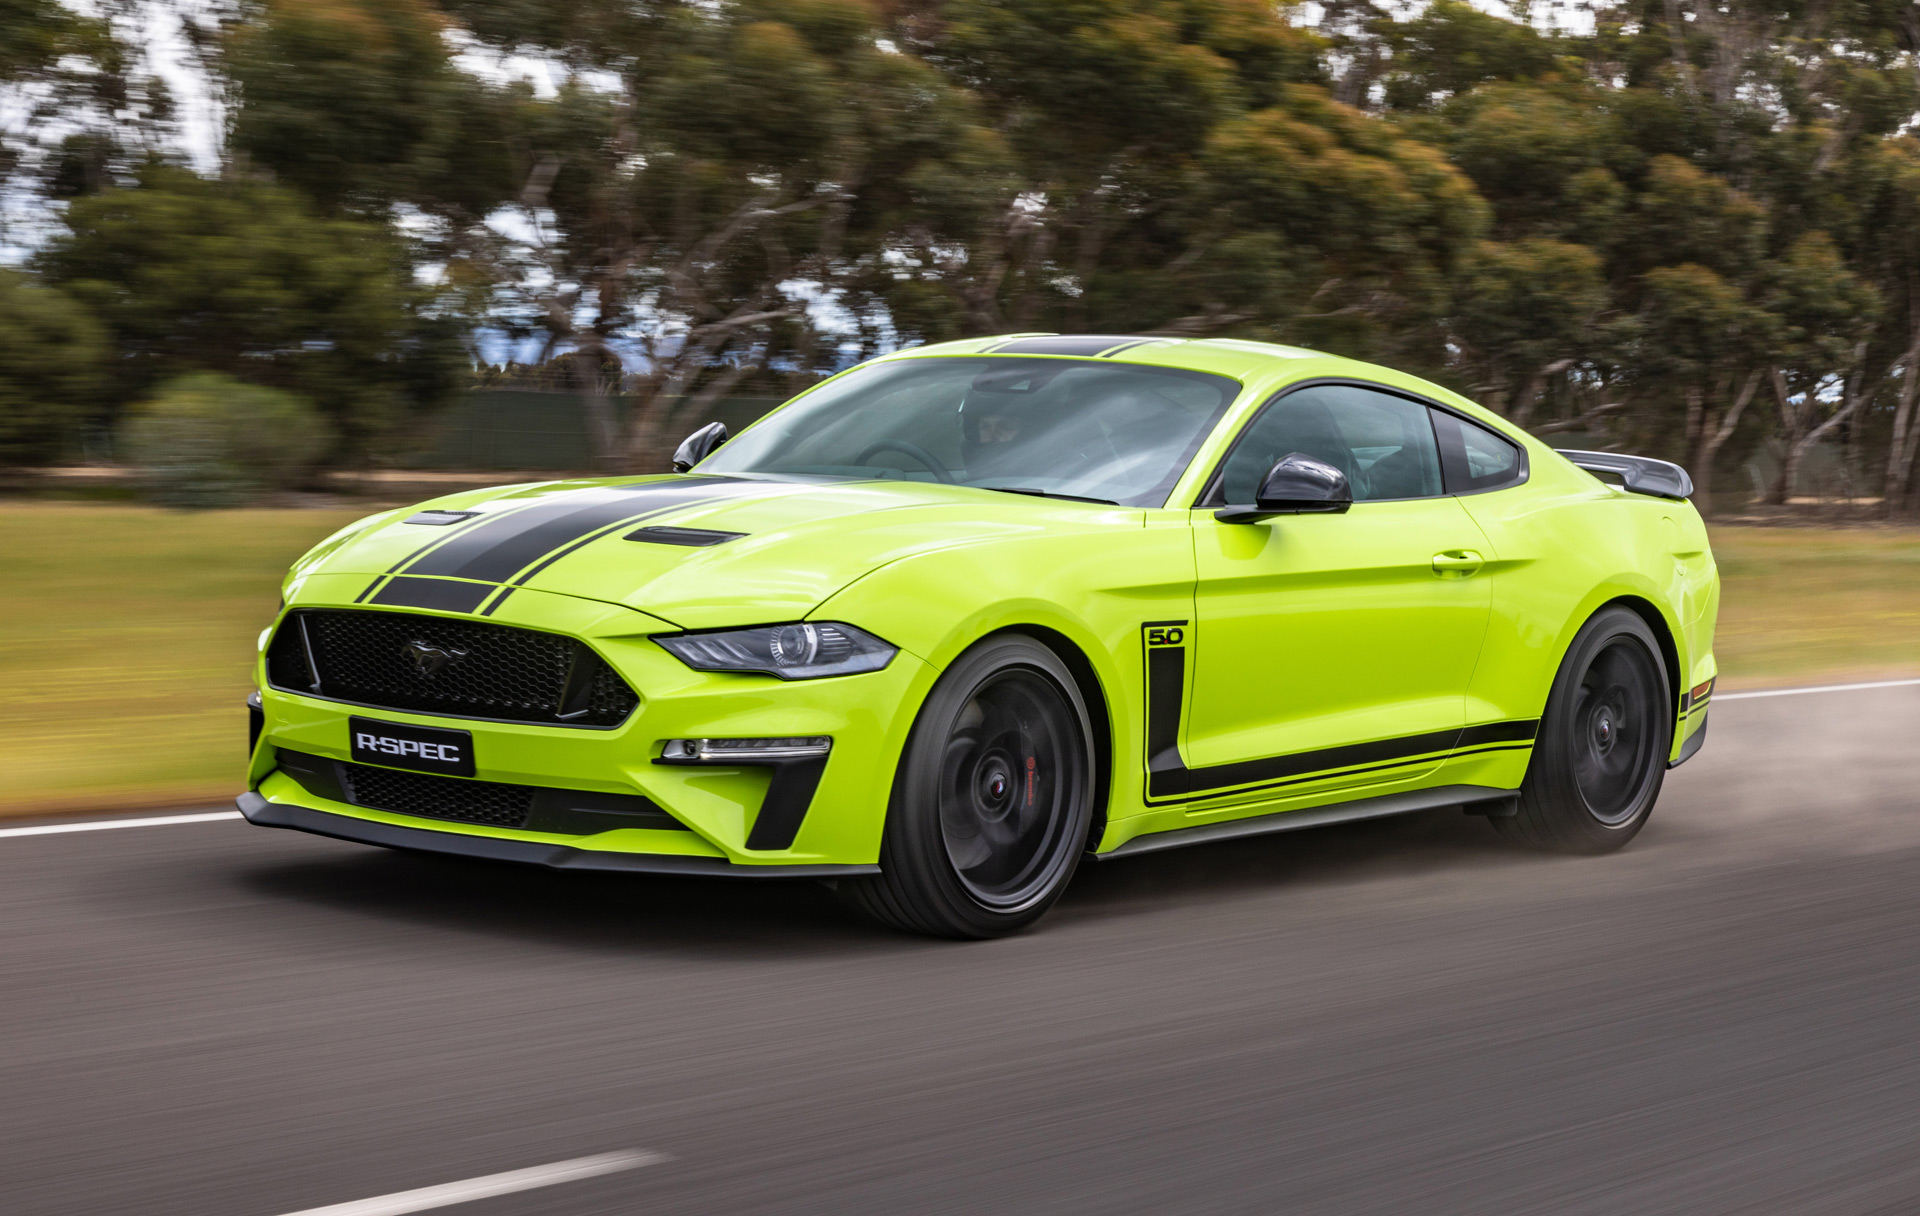 Meet the 2020 Ford Mustang RSpec The 700 Horsepower